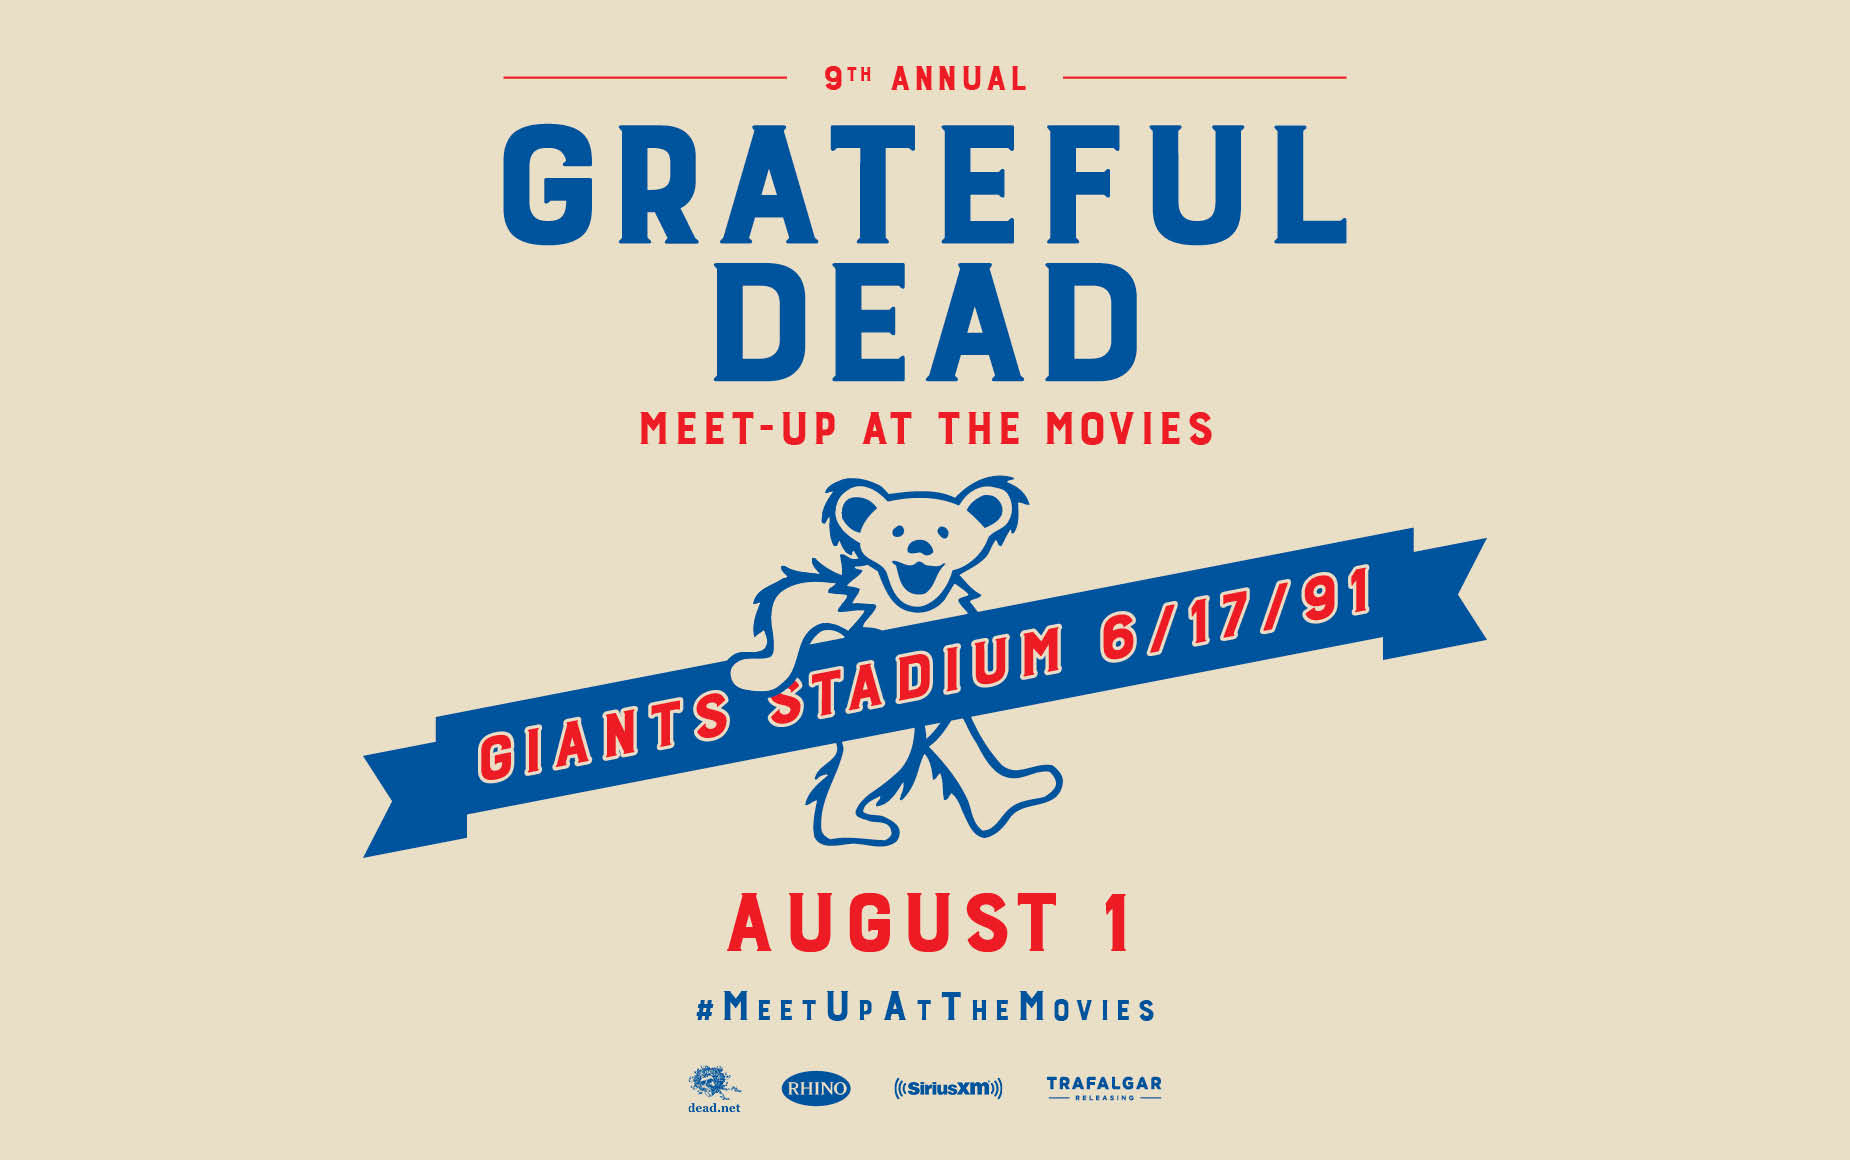 GRATEFUL DEAD MEETUP AT THE MOVIES